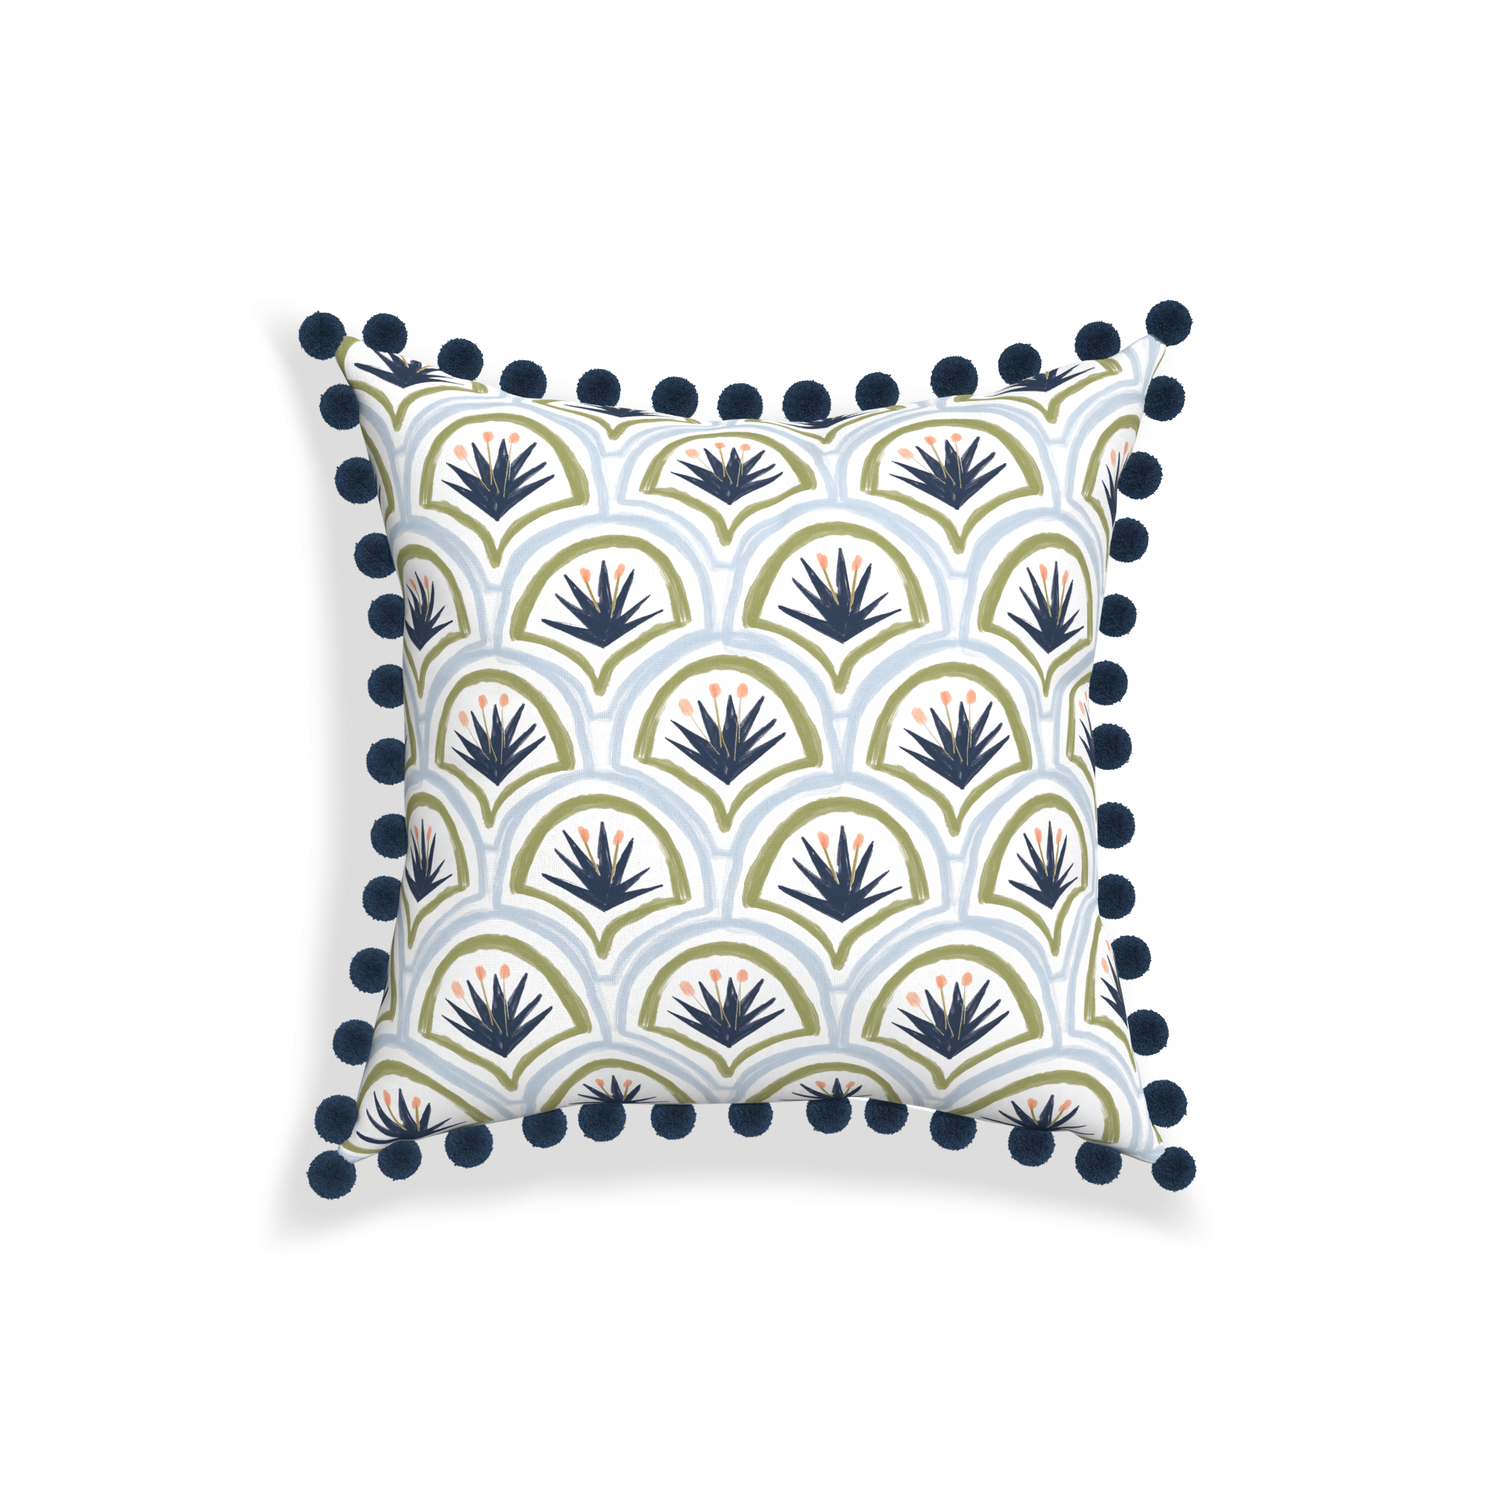 18-square thatcher midnight custom art deco palm patternpillow with c on white background